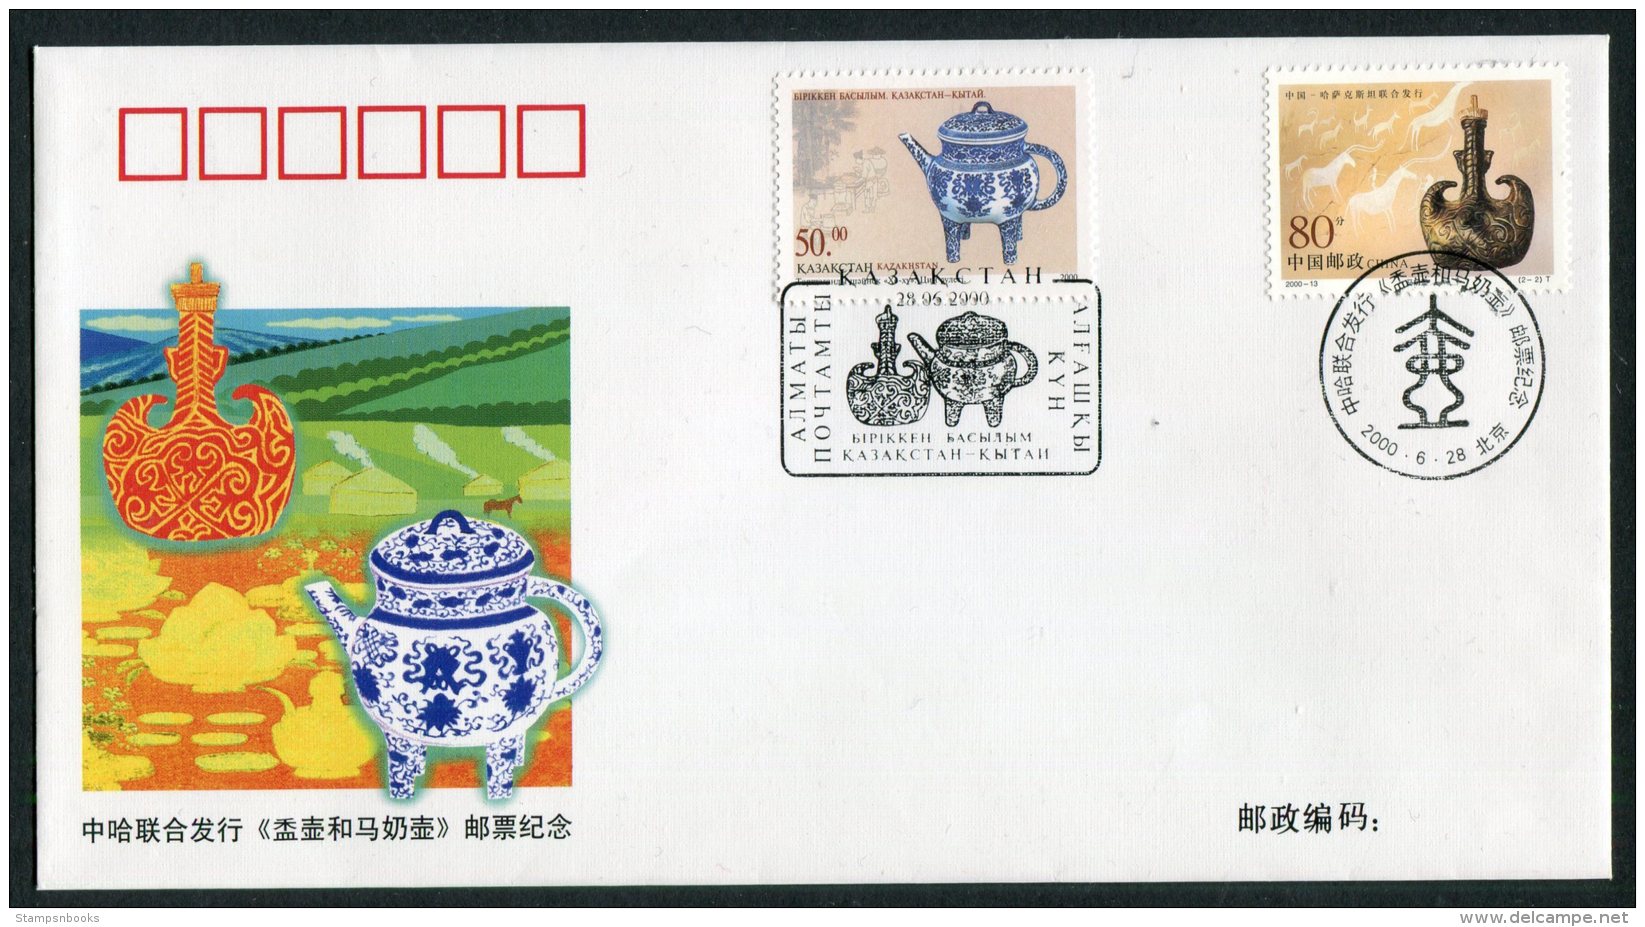 2000 China Kazakhstan Joint Pottery Issue Cover - Covers & Documents